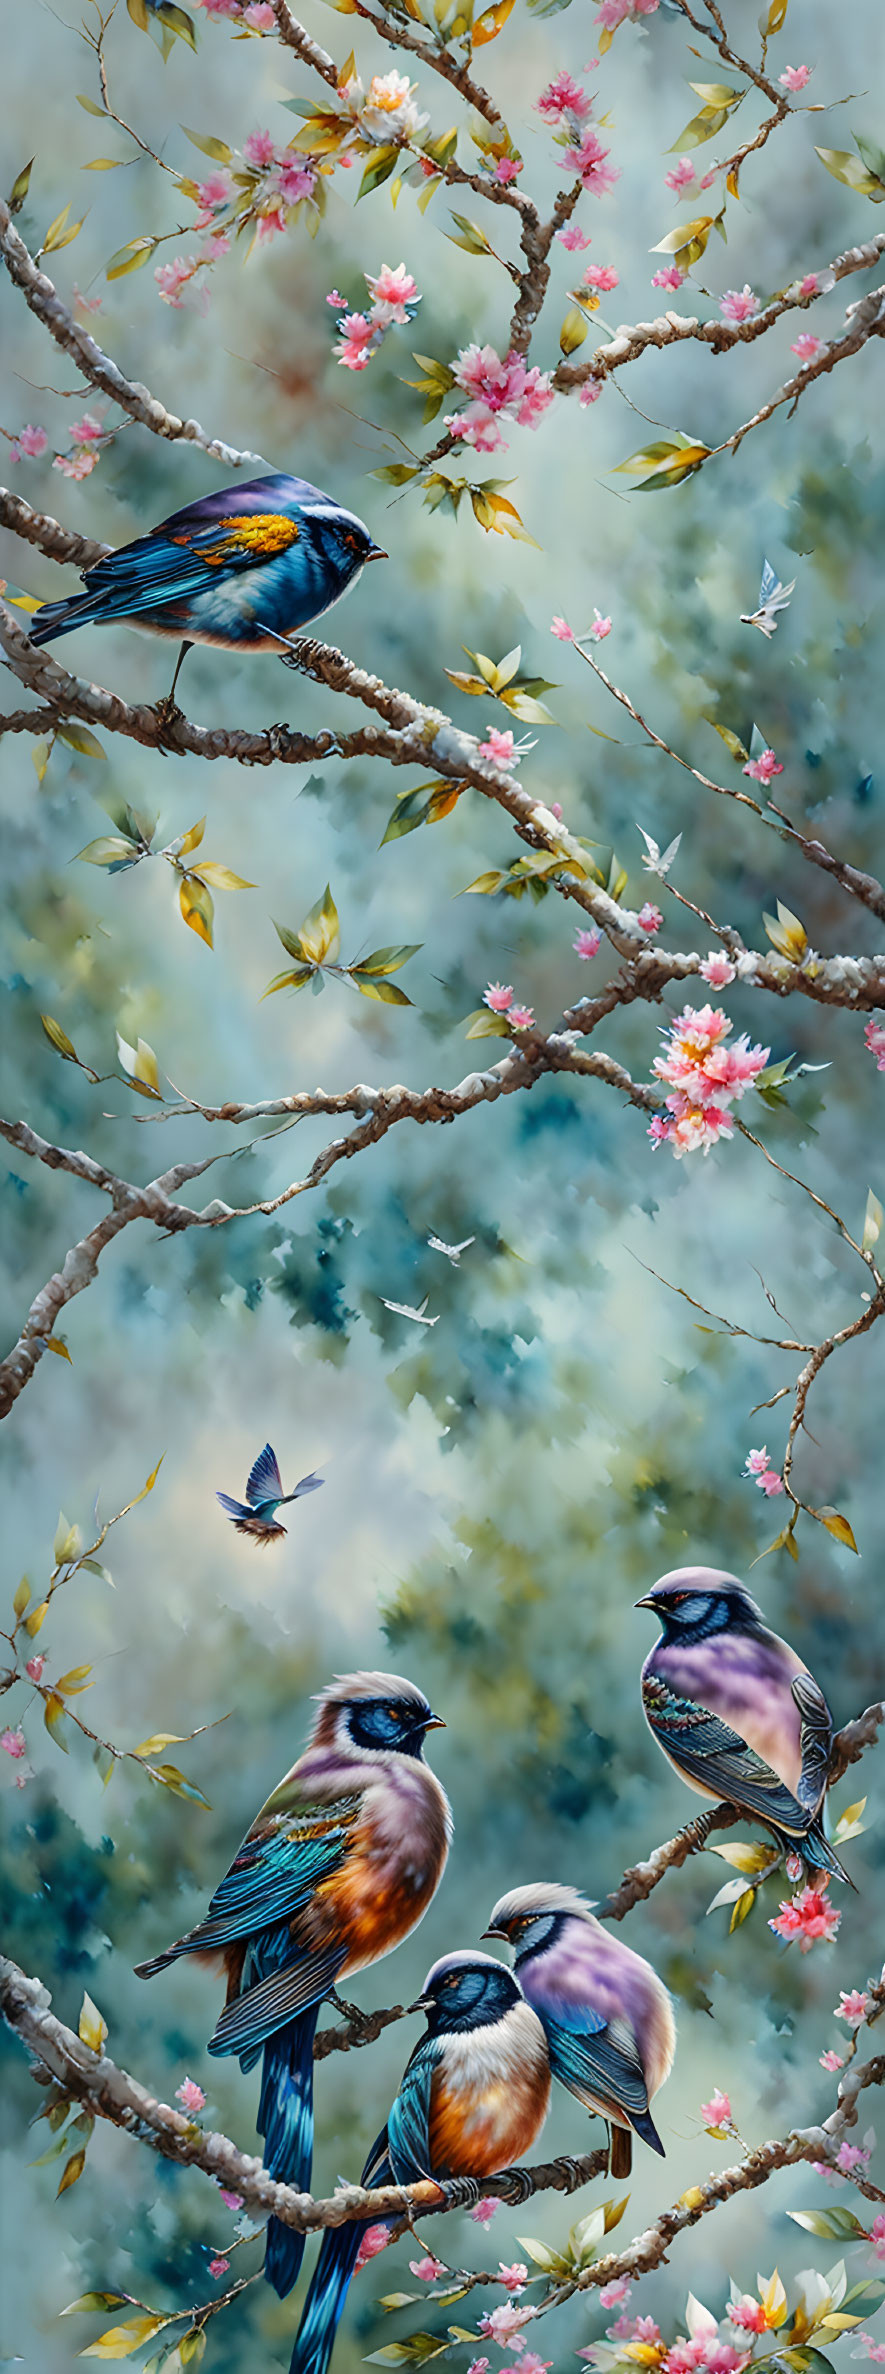 Colorful birds on blooming branches with distant bird in flight and soft bokeh background